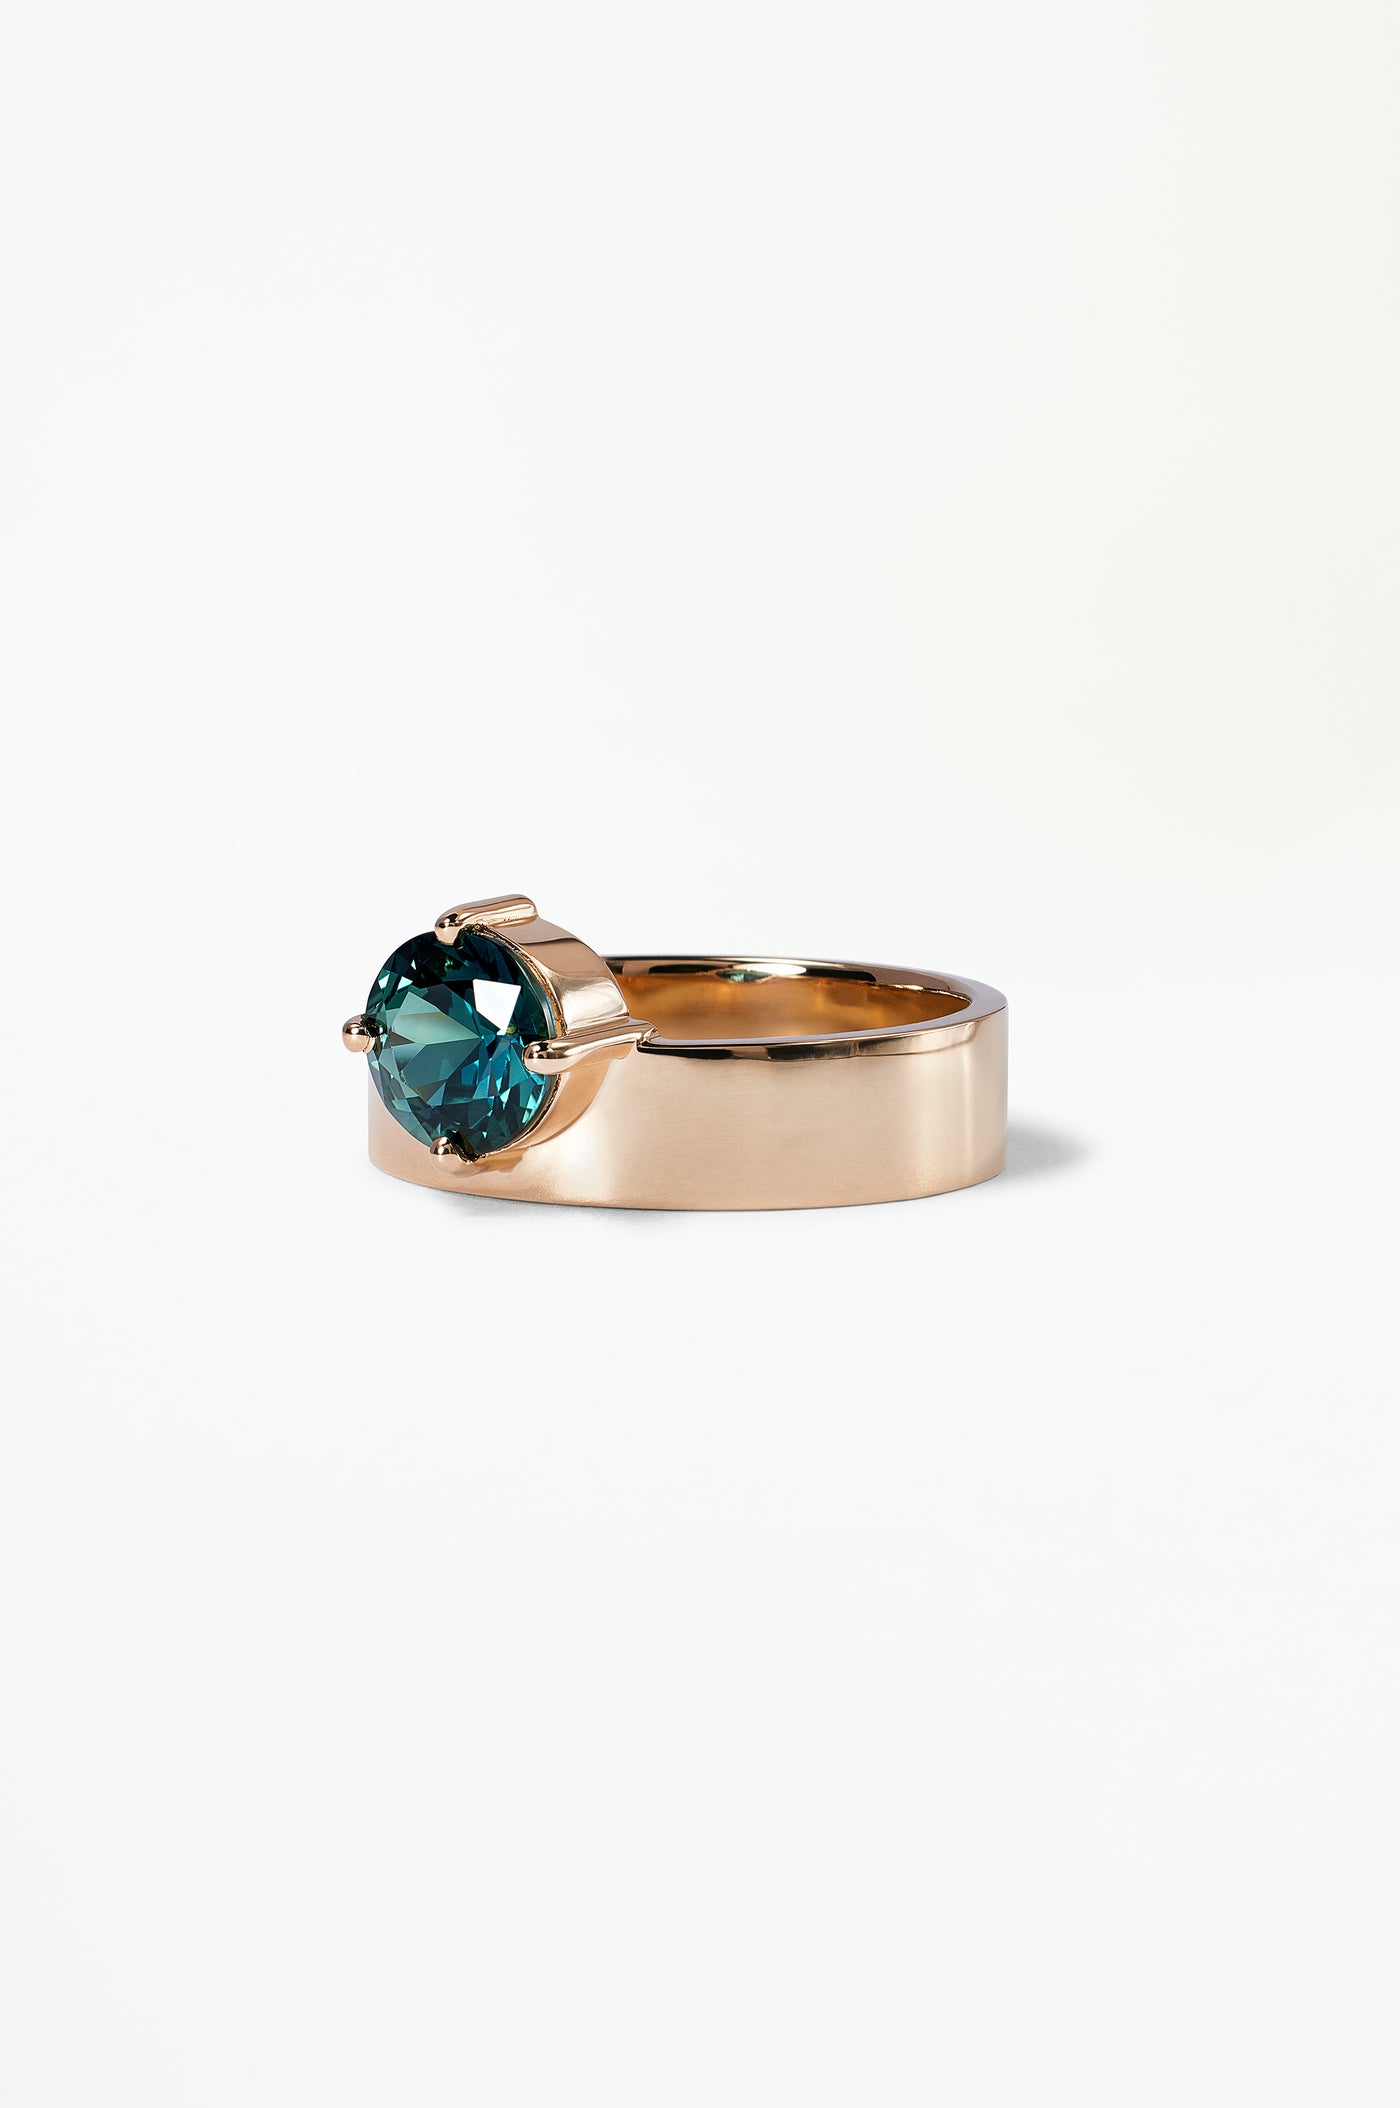 One of a Kind Round Brilliant Cut Teal Sapphire Monolith Ring No. 31